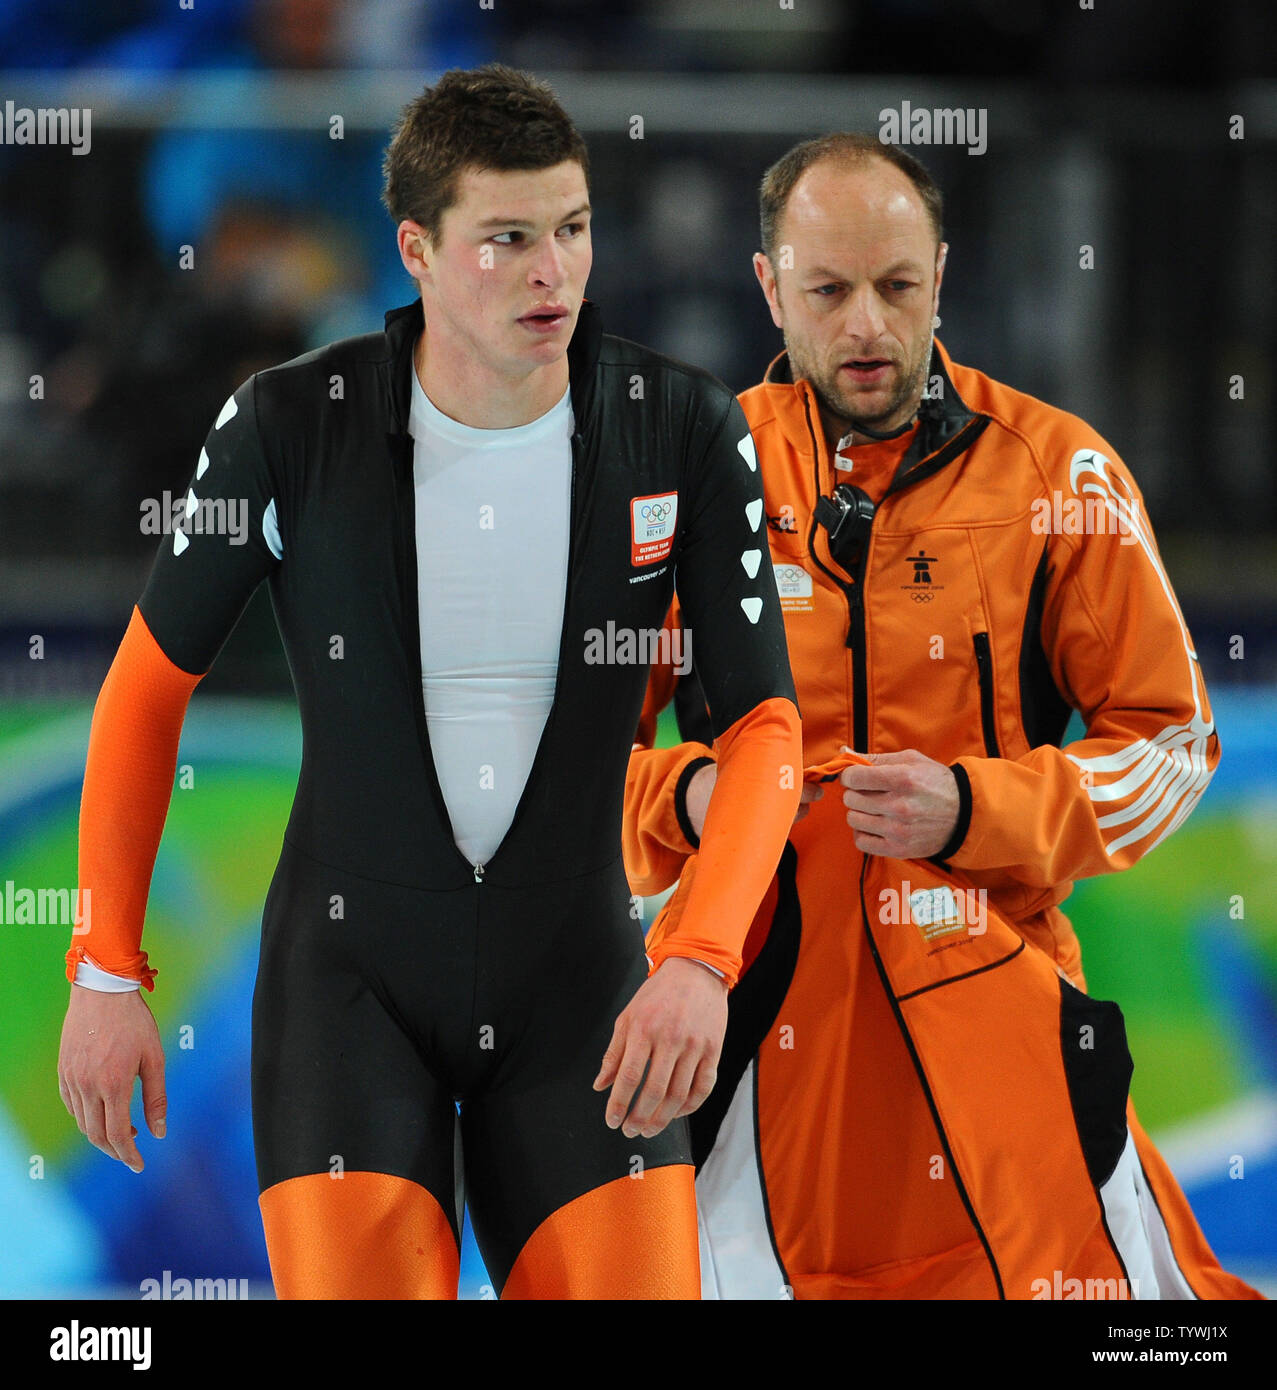 The Netherlands Sven Kramer Skates A Cool Down Lap With A Coach After Competing In Men S 10 000 Meter Speed Skating In Vancouver Canada During The 2010 Winter Olympics On February 23 2010